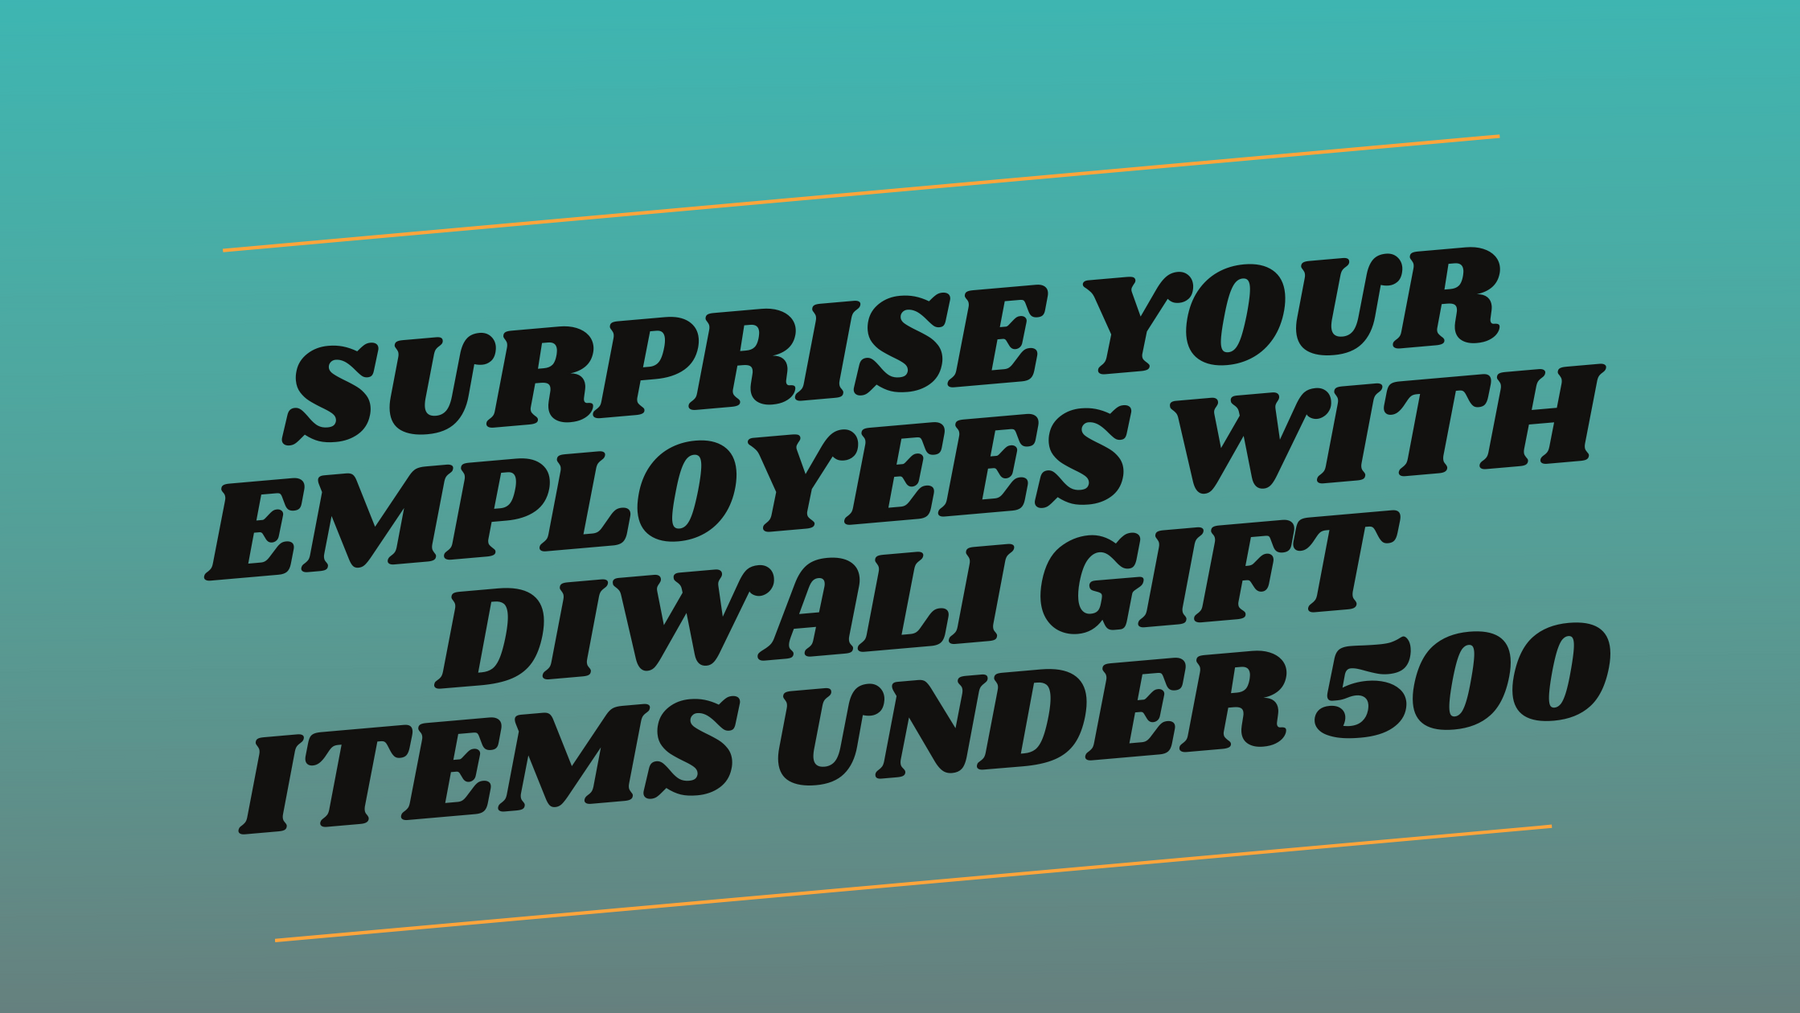 Surprise Your Employees With Diwali Gift Items Under 500